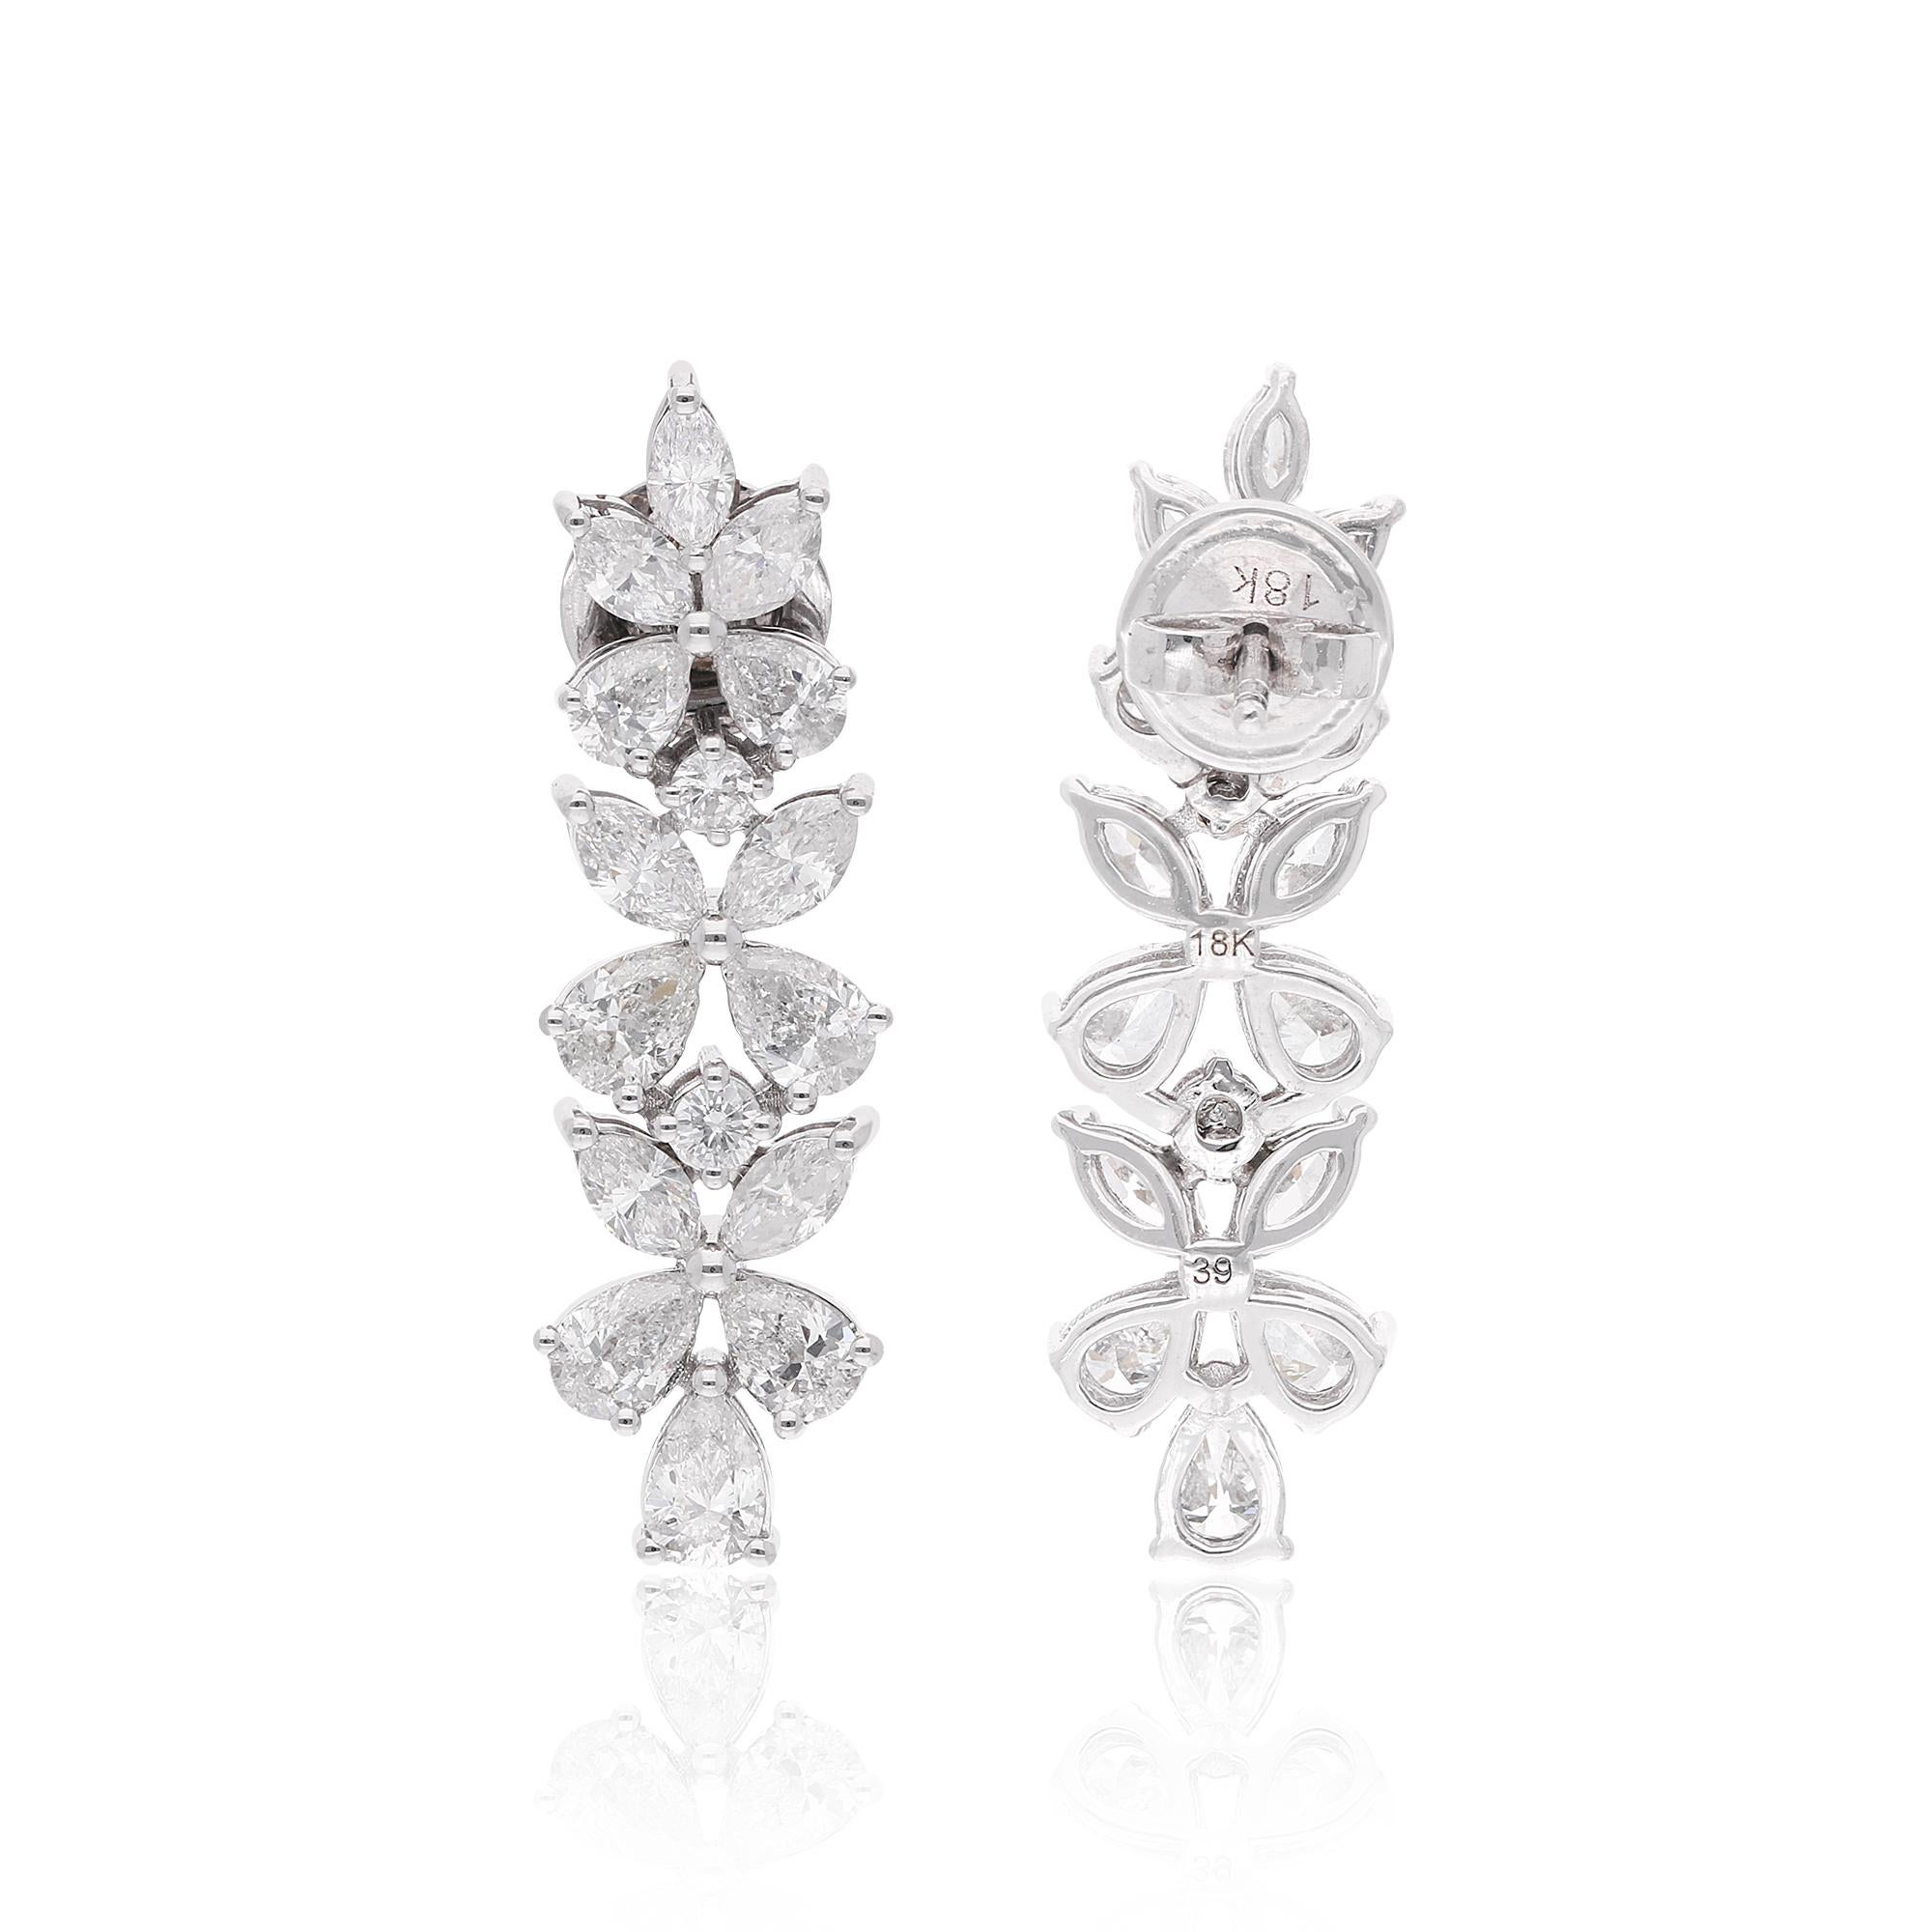 Marquise Cut 4.02 Carat SI Clarity HI Color Marquise Diamond Earrings 18 Karat White Gold For Sale